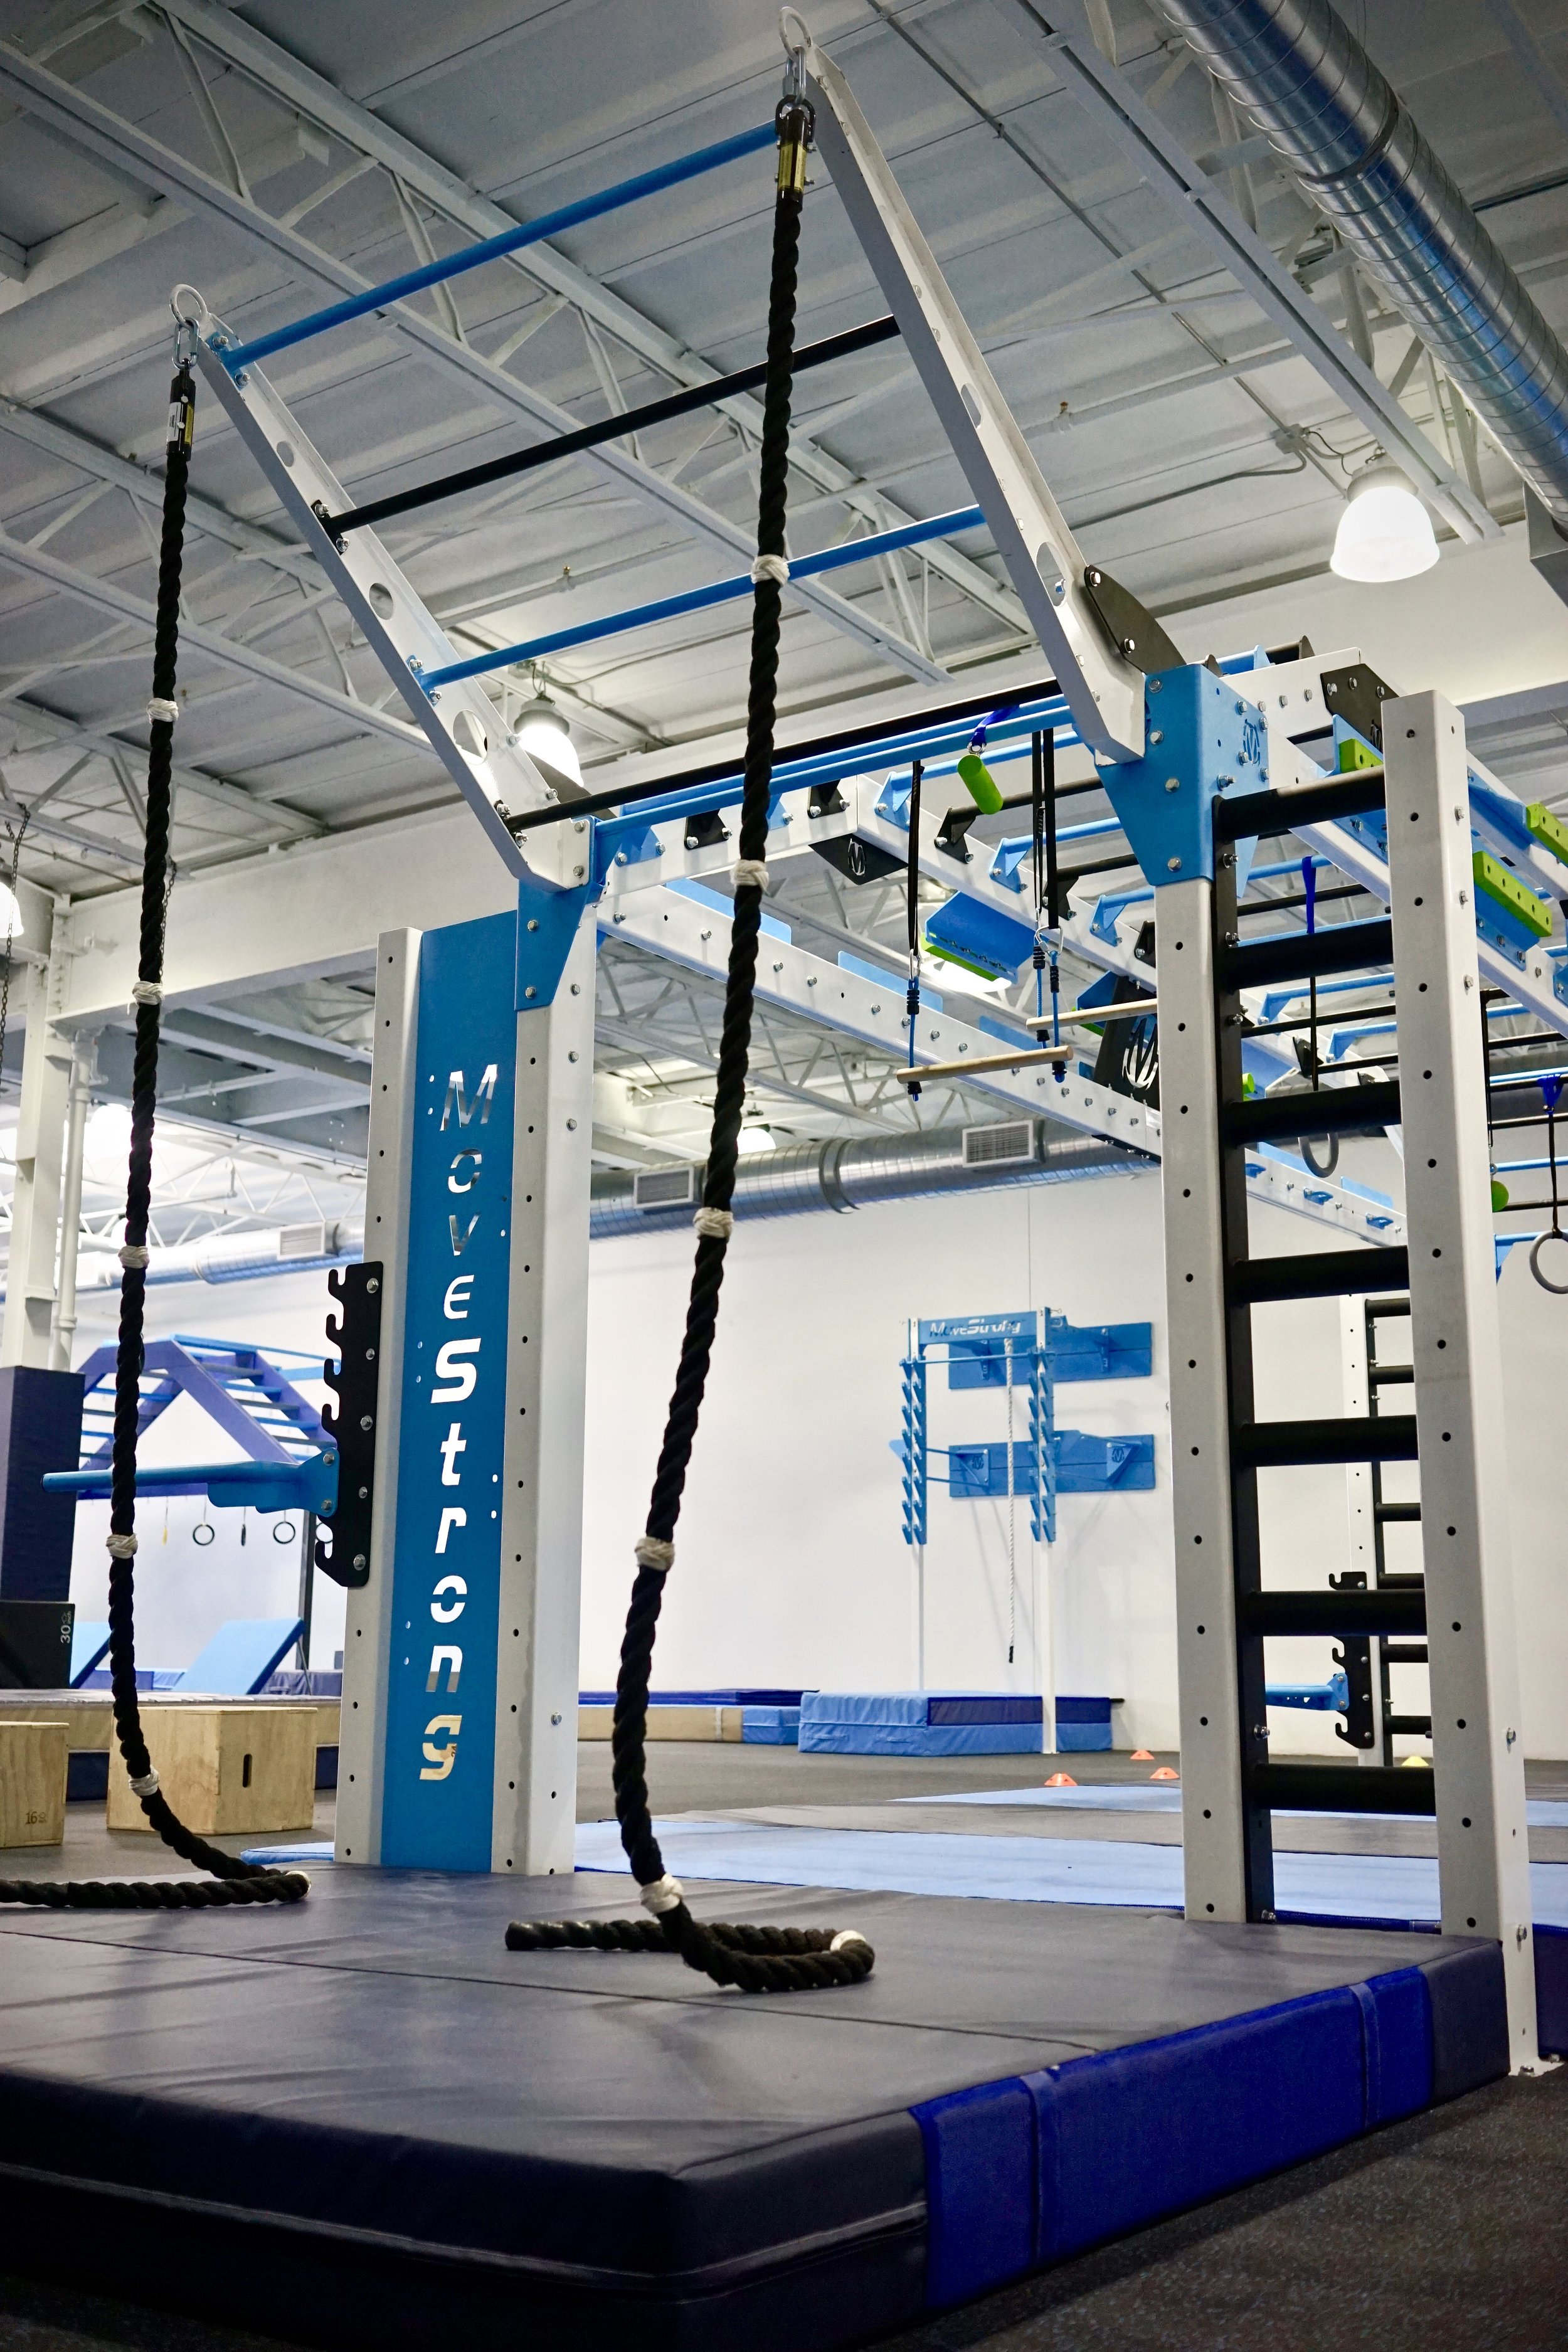 Climber bar with Rope Climb stations